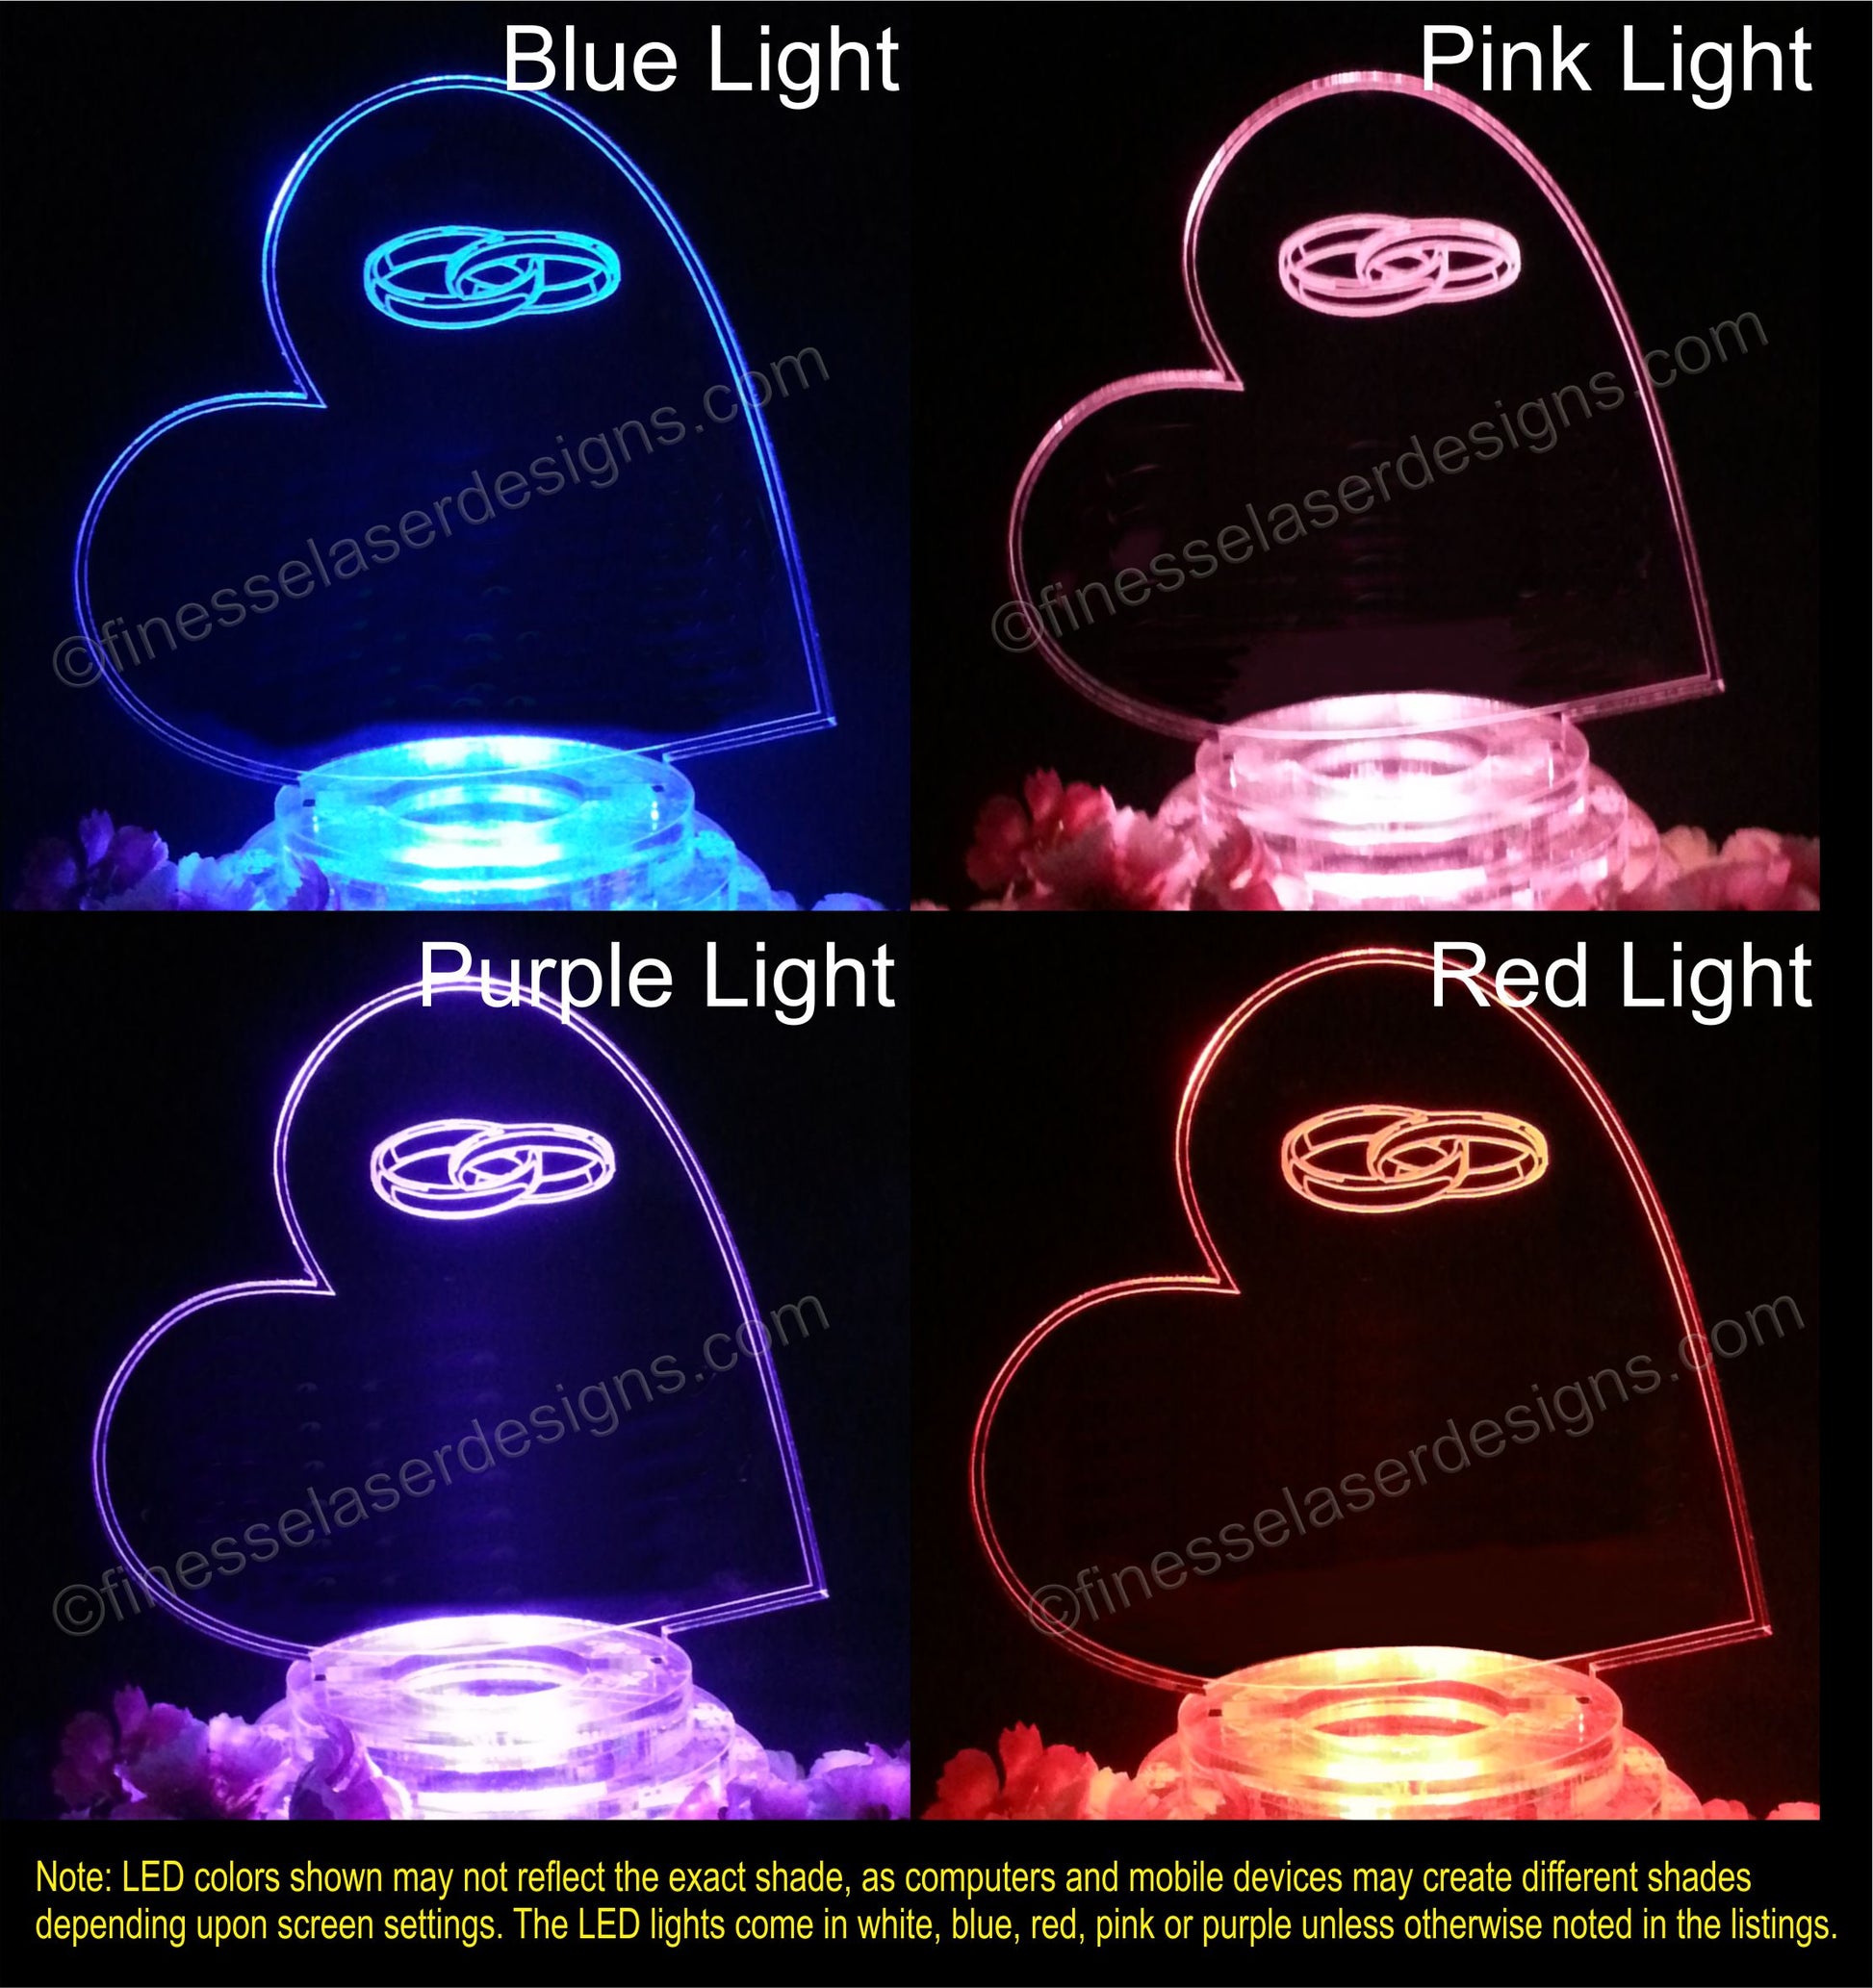 4 colored lighting views of a heart shaped cake topper designed with wedding rings, shown in blue, pink, purple and red lighting